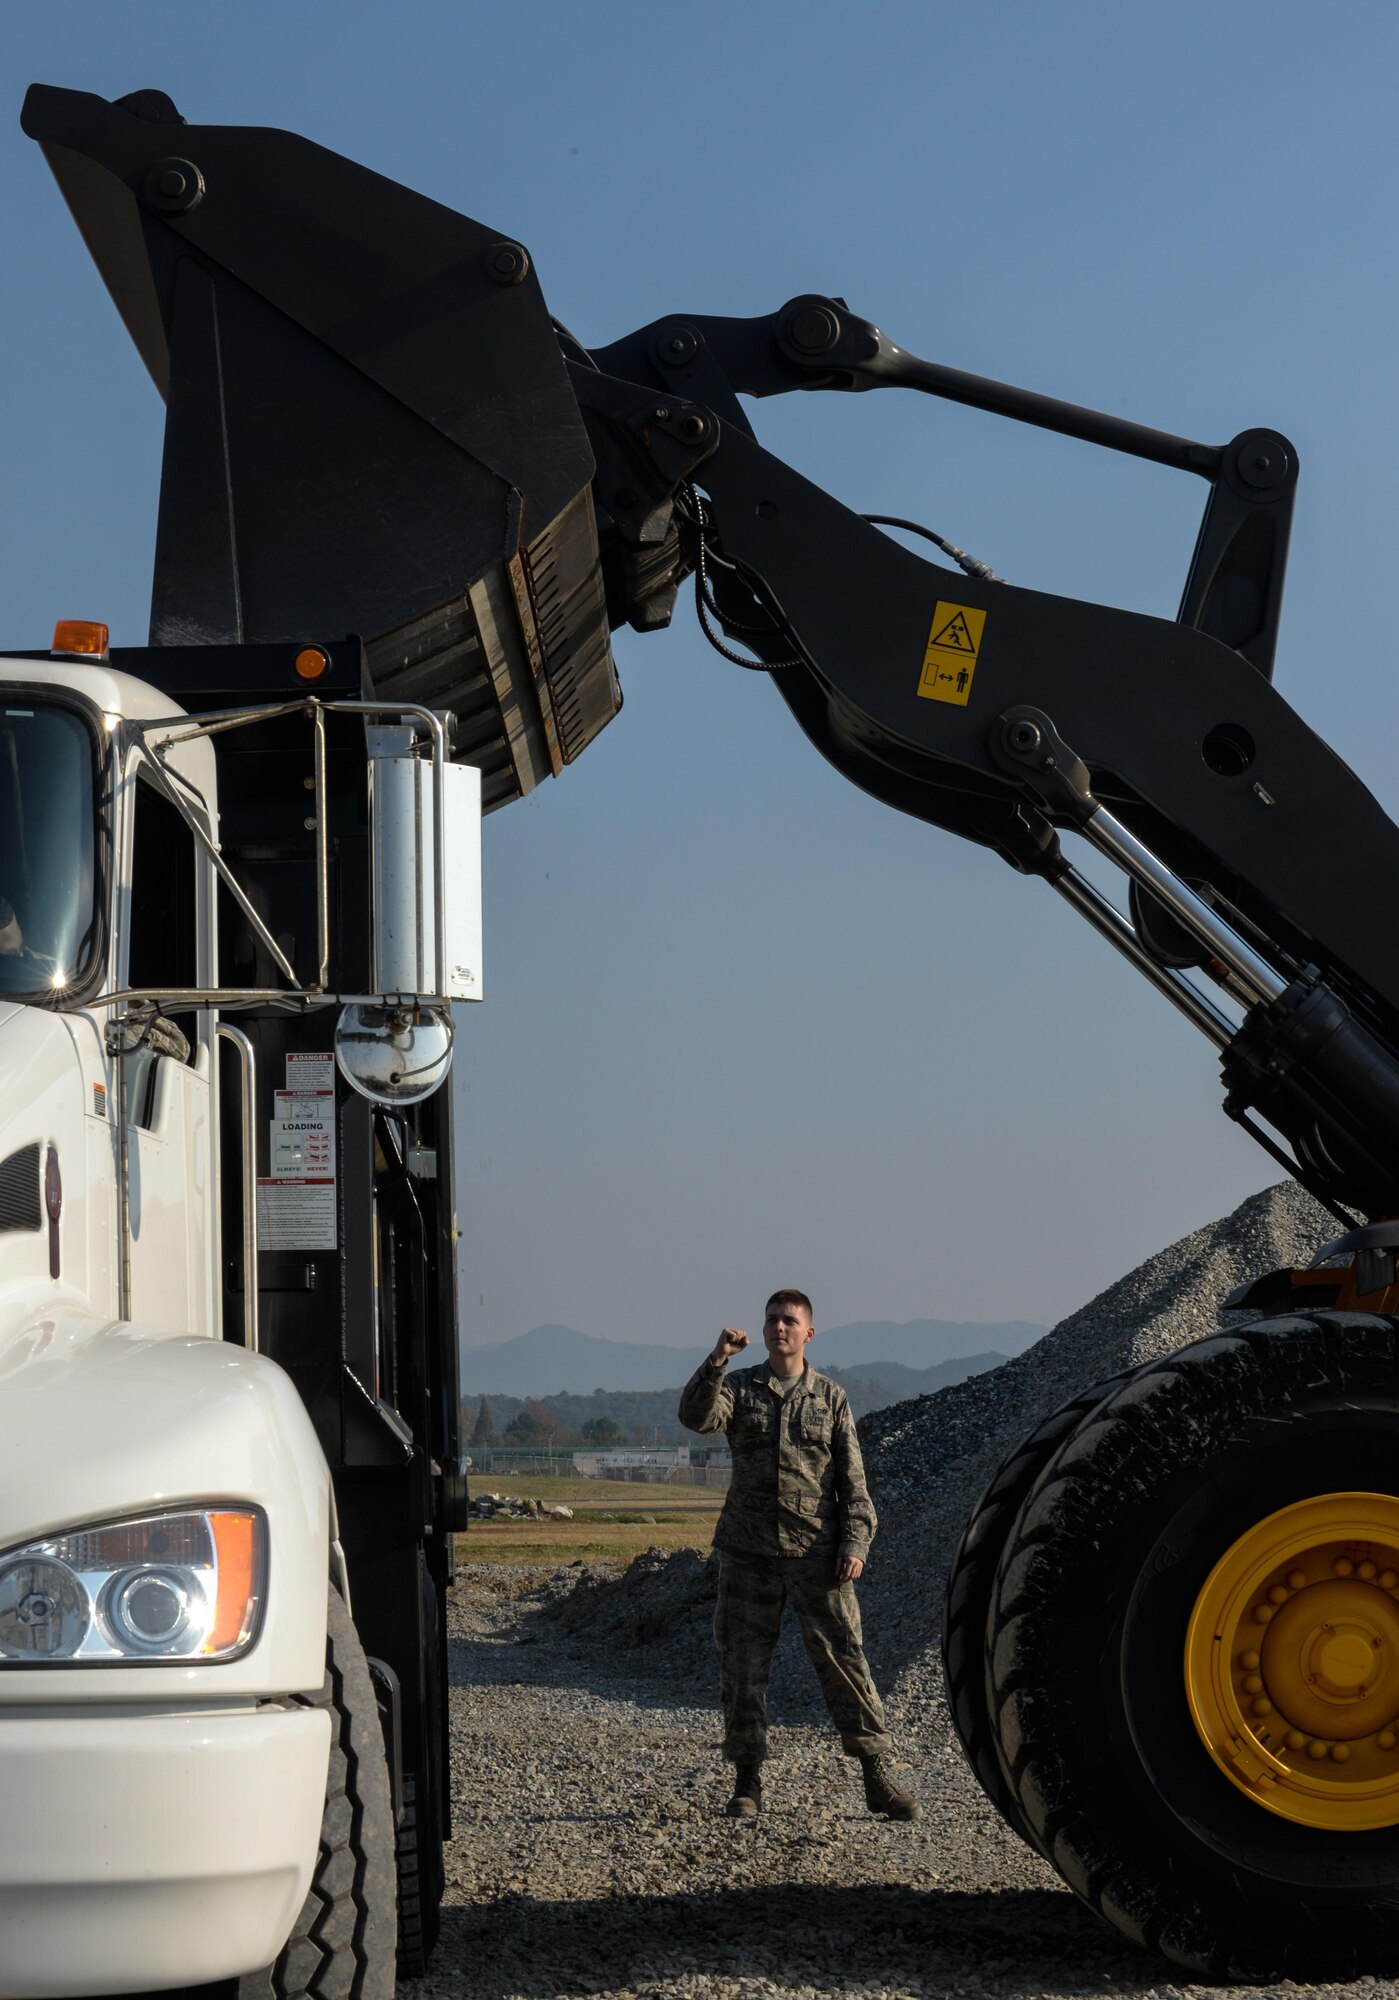 U.S. Air Force Airman 1st Class Charles Lucas provides guidance during a Rapid Airfield Damage Repair exercise at Gwangju Air Base, Republic of Korea, Nov. 6, 2017. Approximately forty U.S. Airmen from the 773d Civil Engineer Squadron at Joint Base Elmendorf-Richardson, Alaska, and 40 Republic of Korea Airmen from Gwangju trained together for a week to learn a new runway repair process for wartime contingencies. (U.S. Air Force photo by Senior Airman Curt Beach)